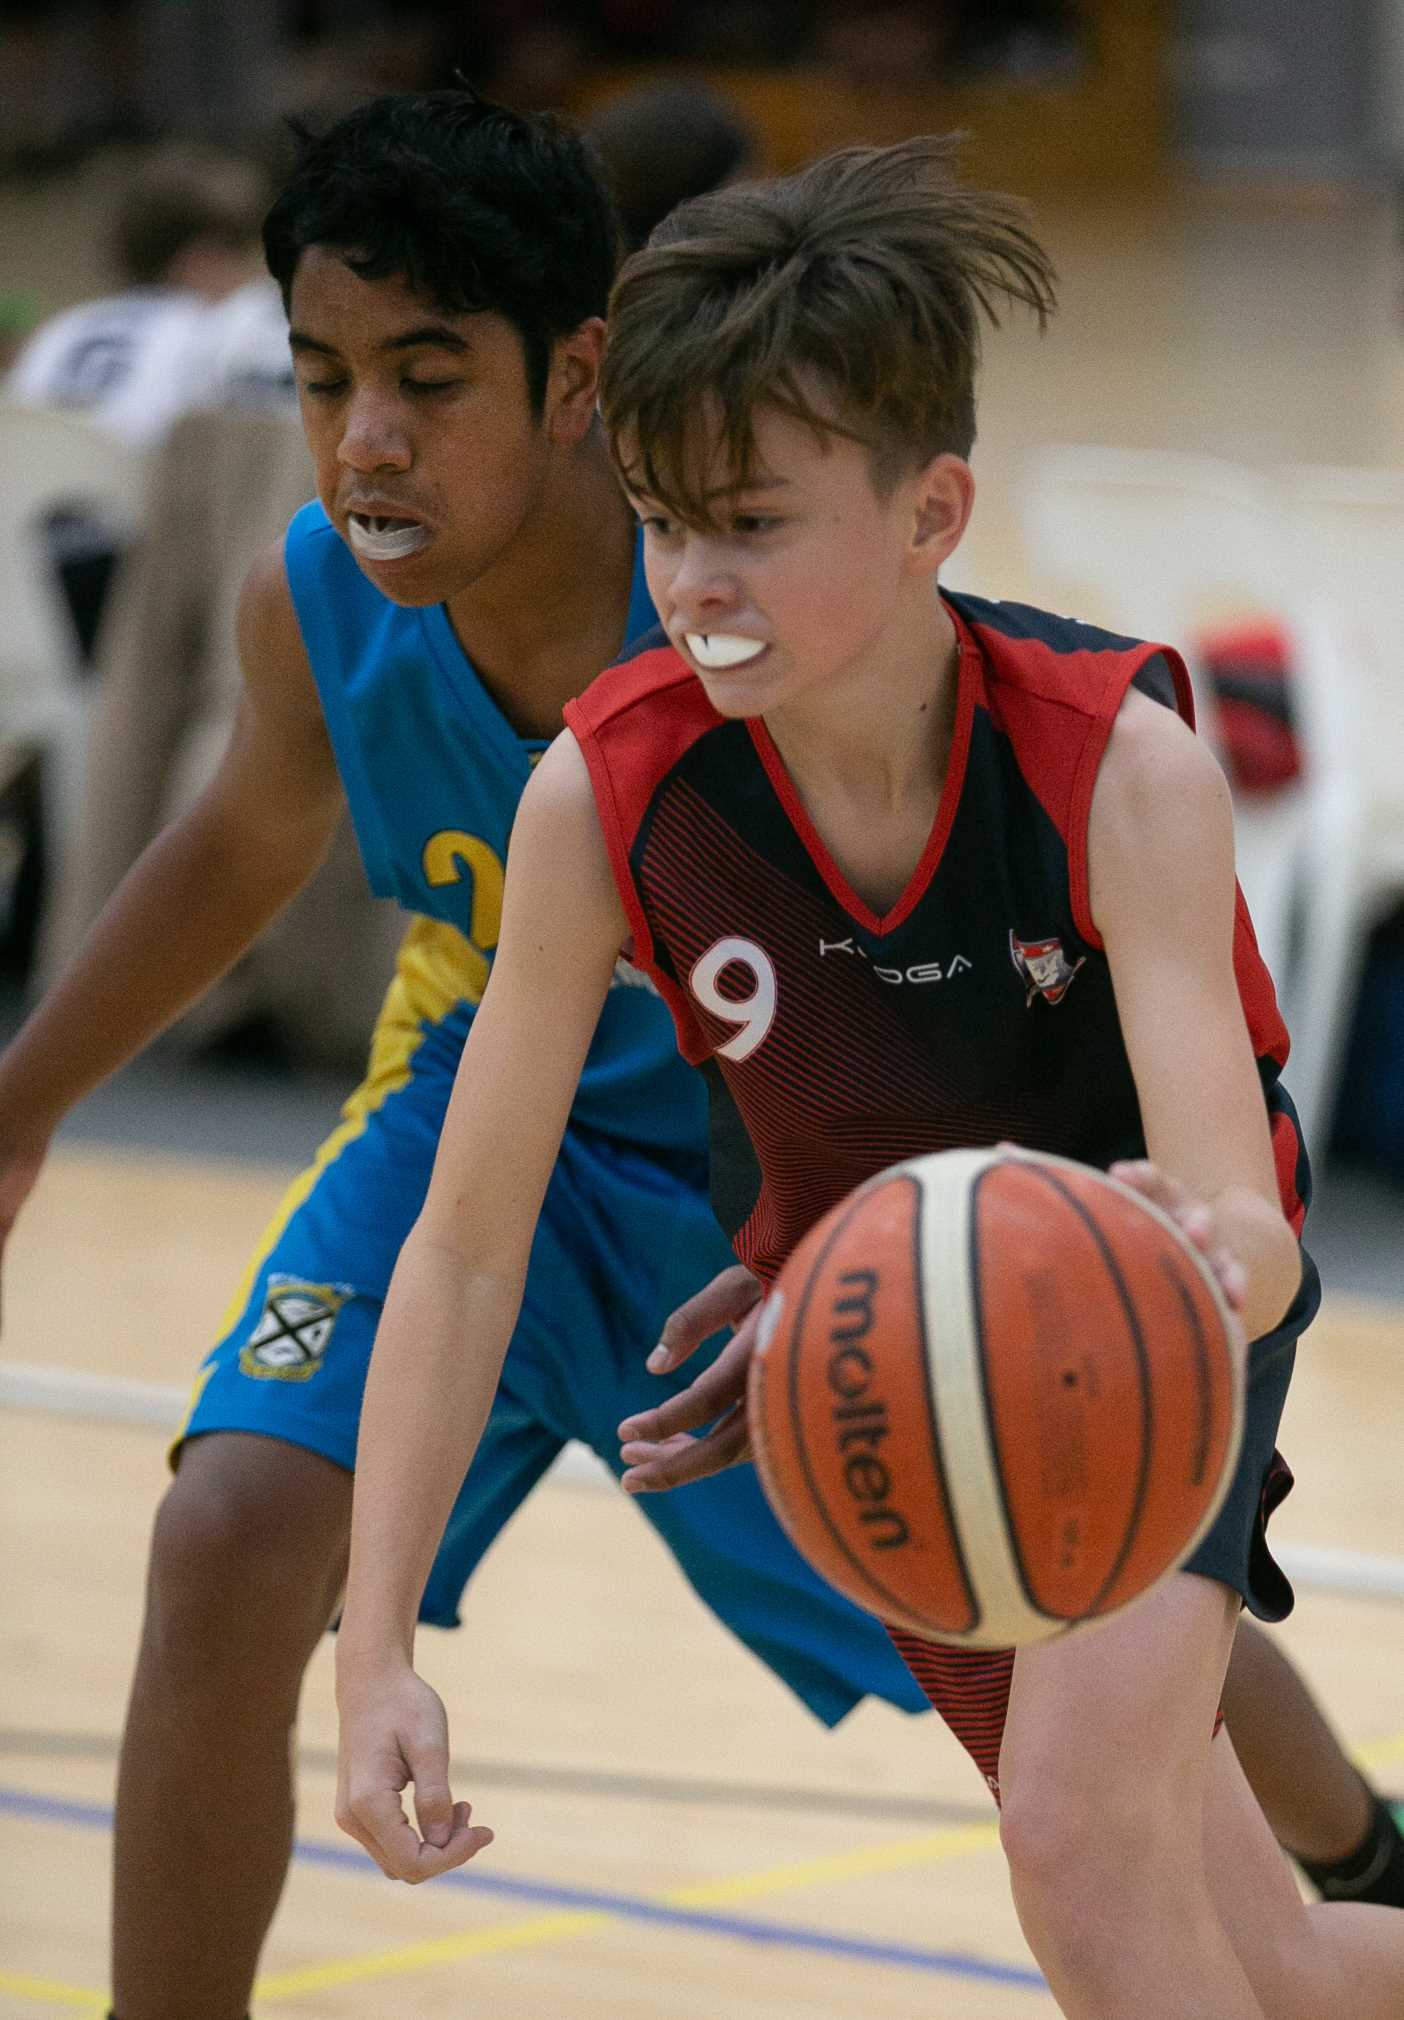 Action from the basketball at the 2019 Anchor AIMS Games in Tauranga.